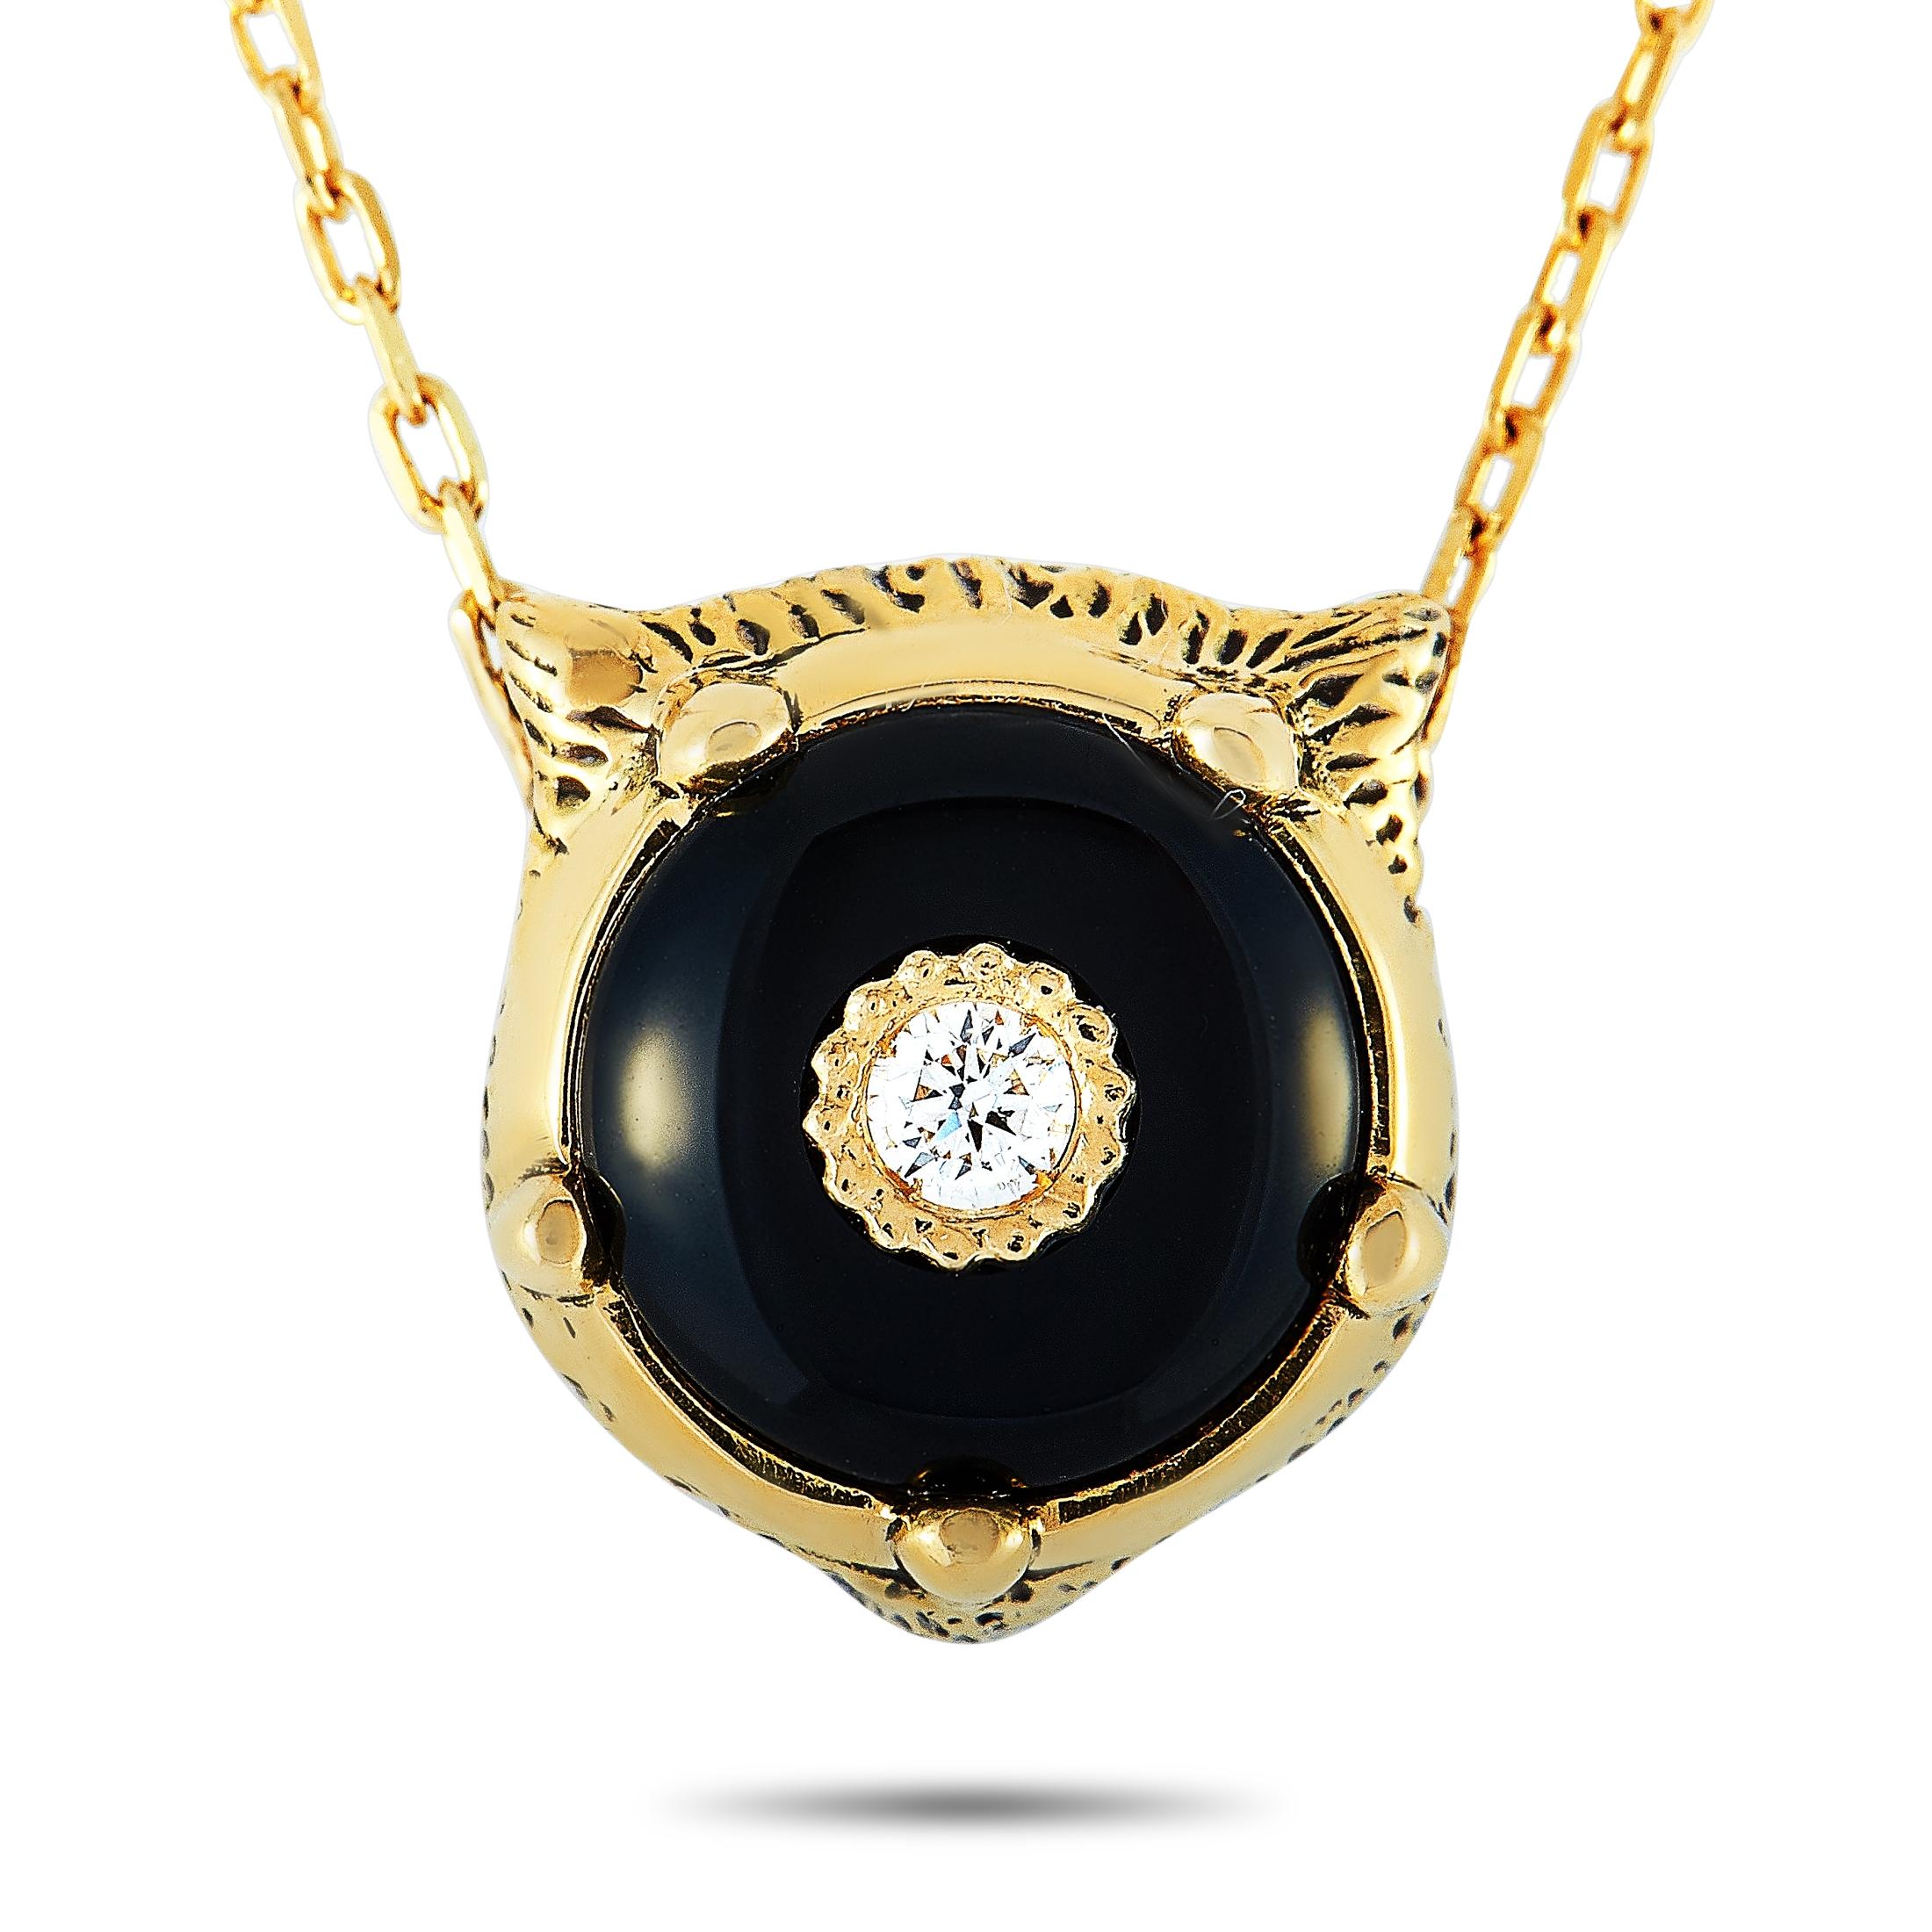 The Gucci “LMDM” necklace is made of 18K yellow gold and decorated with diamonds and an onyx. The necklace weighs 6 grams and boasts a 16” chain and a pendant that measures 0.37” in length and 0.37” in width.
 
 This jewelry piece is offered in